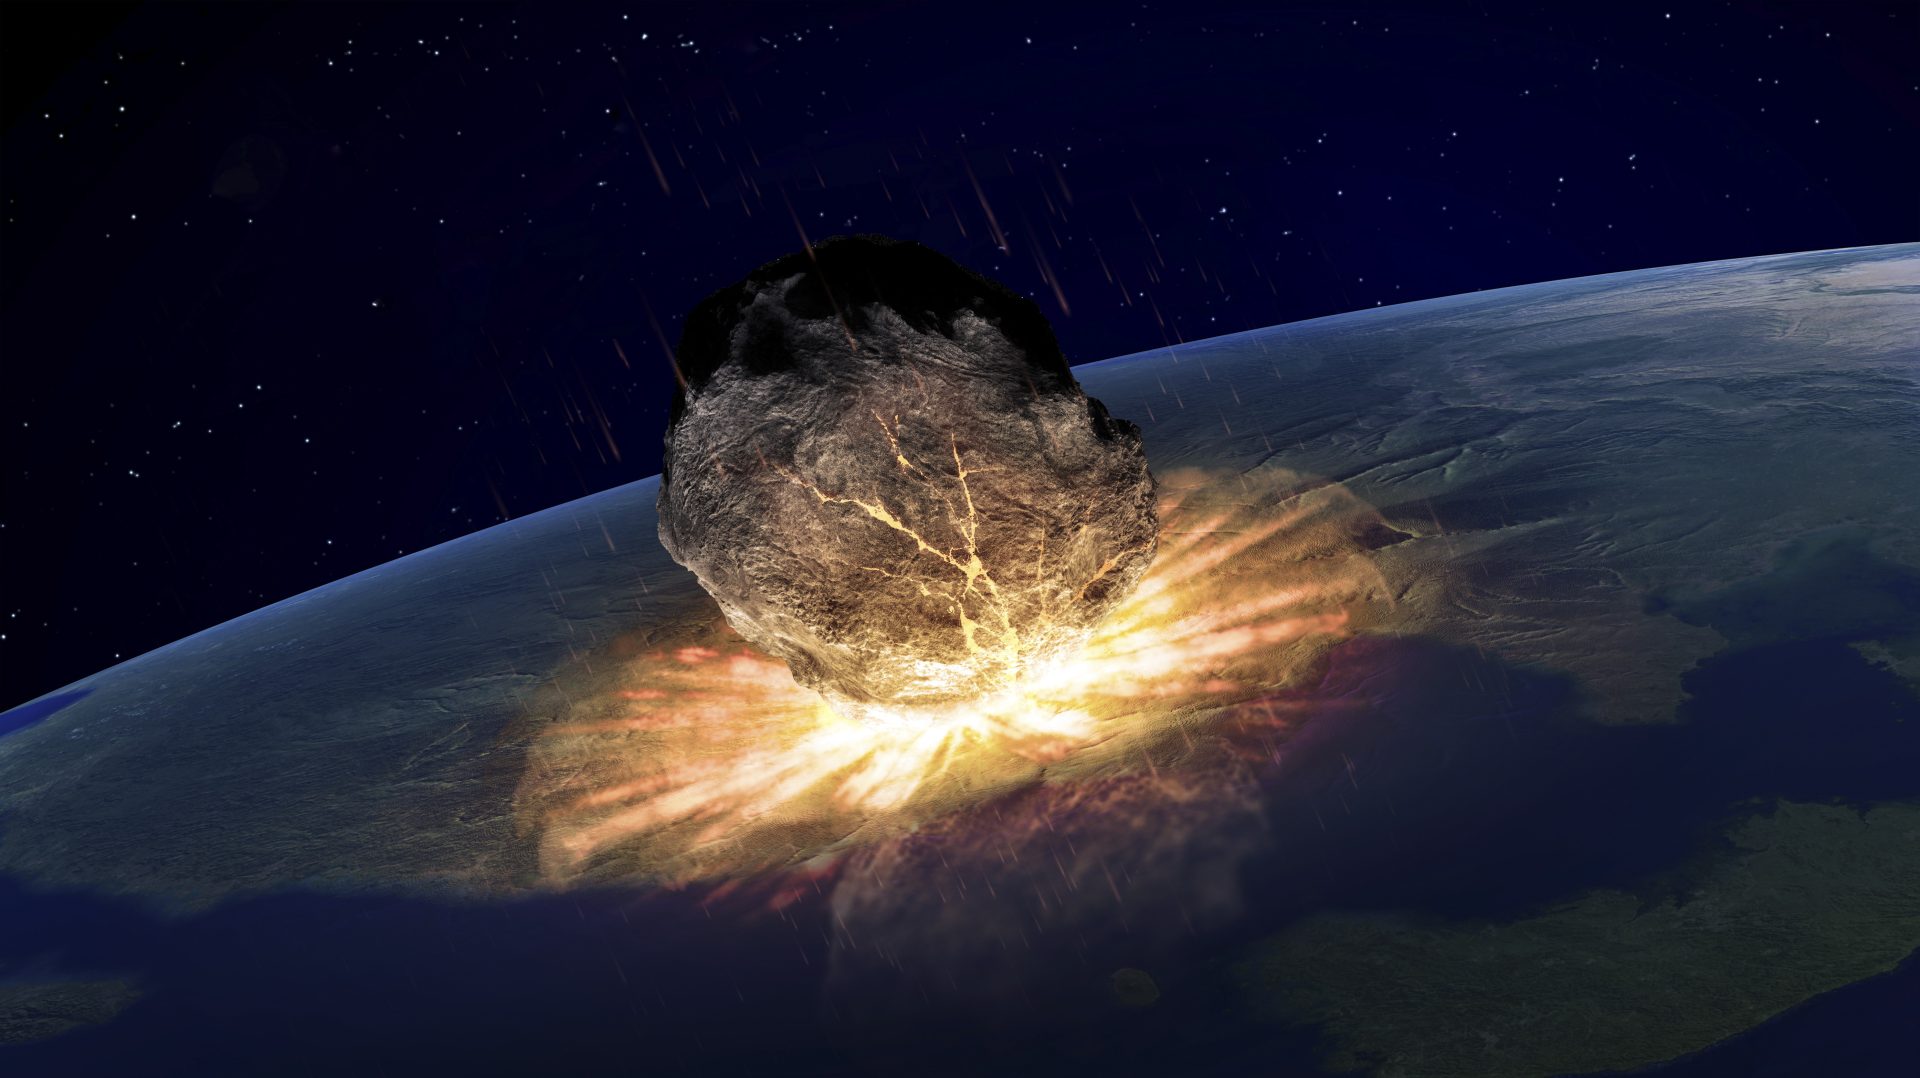 What would happen if an asteroid had been going to hit Earth? A NASA scientist explains.